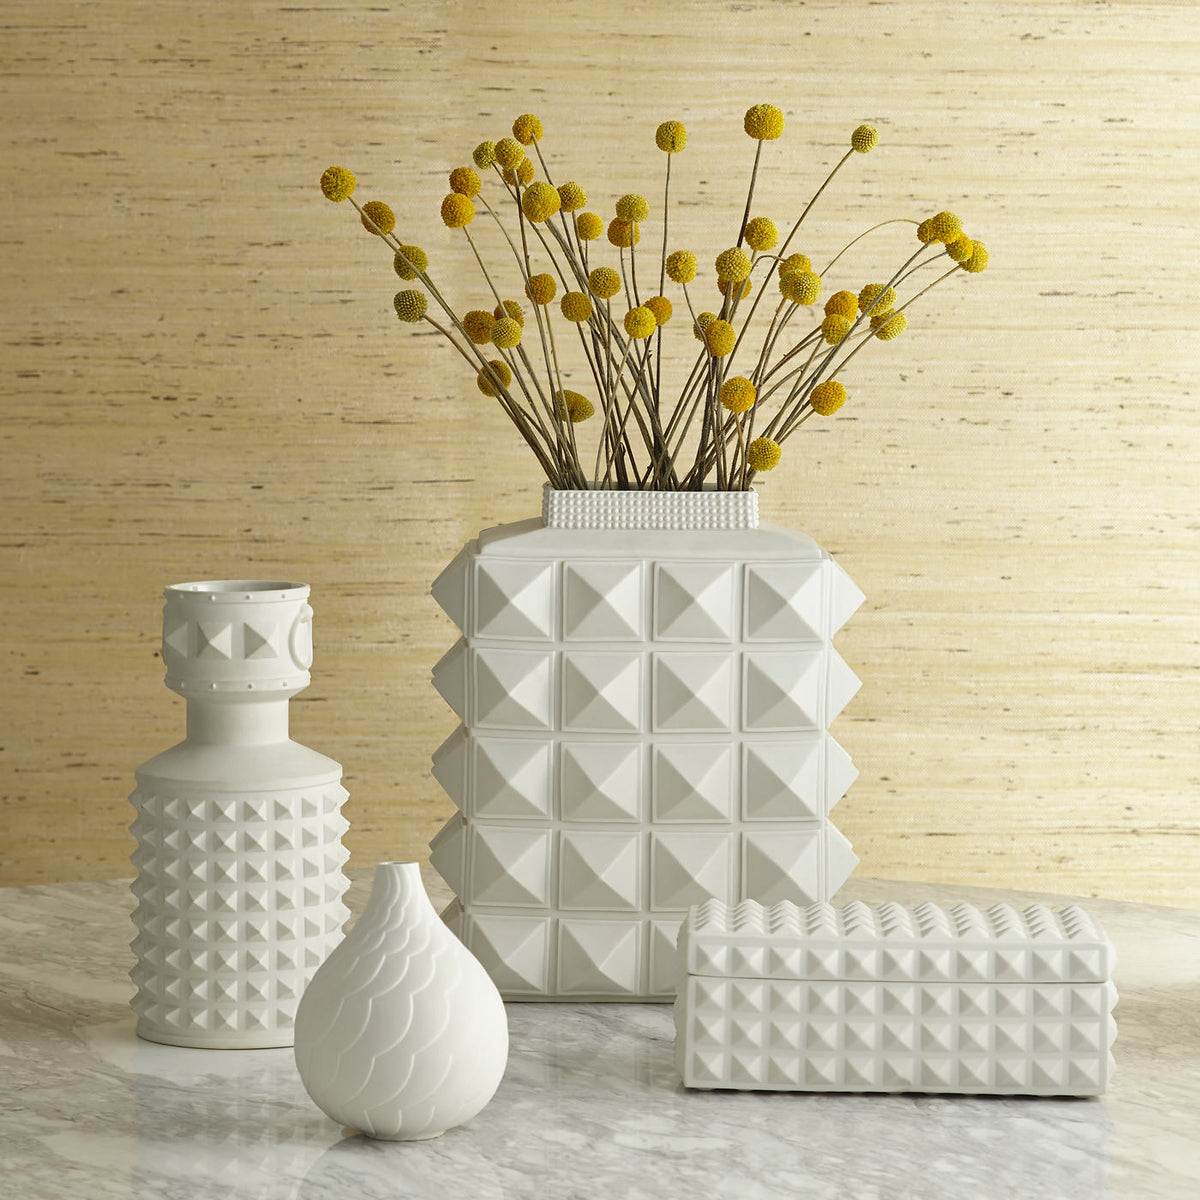 Charade Studded Collection by Jonathan Adler